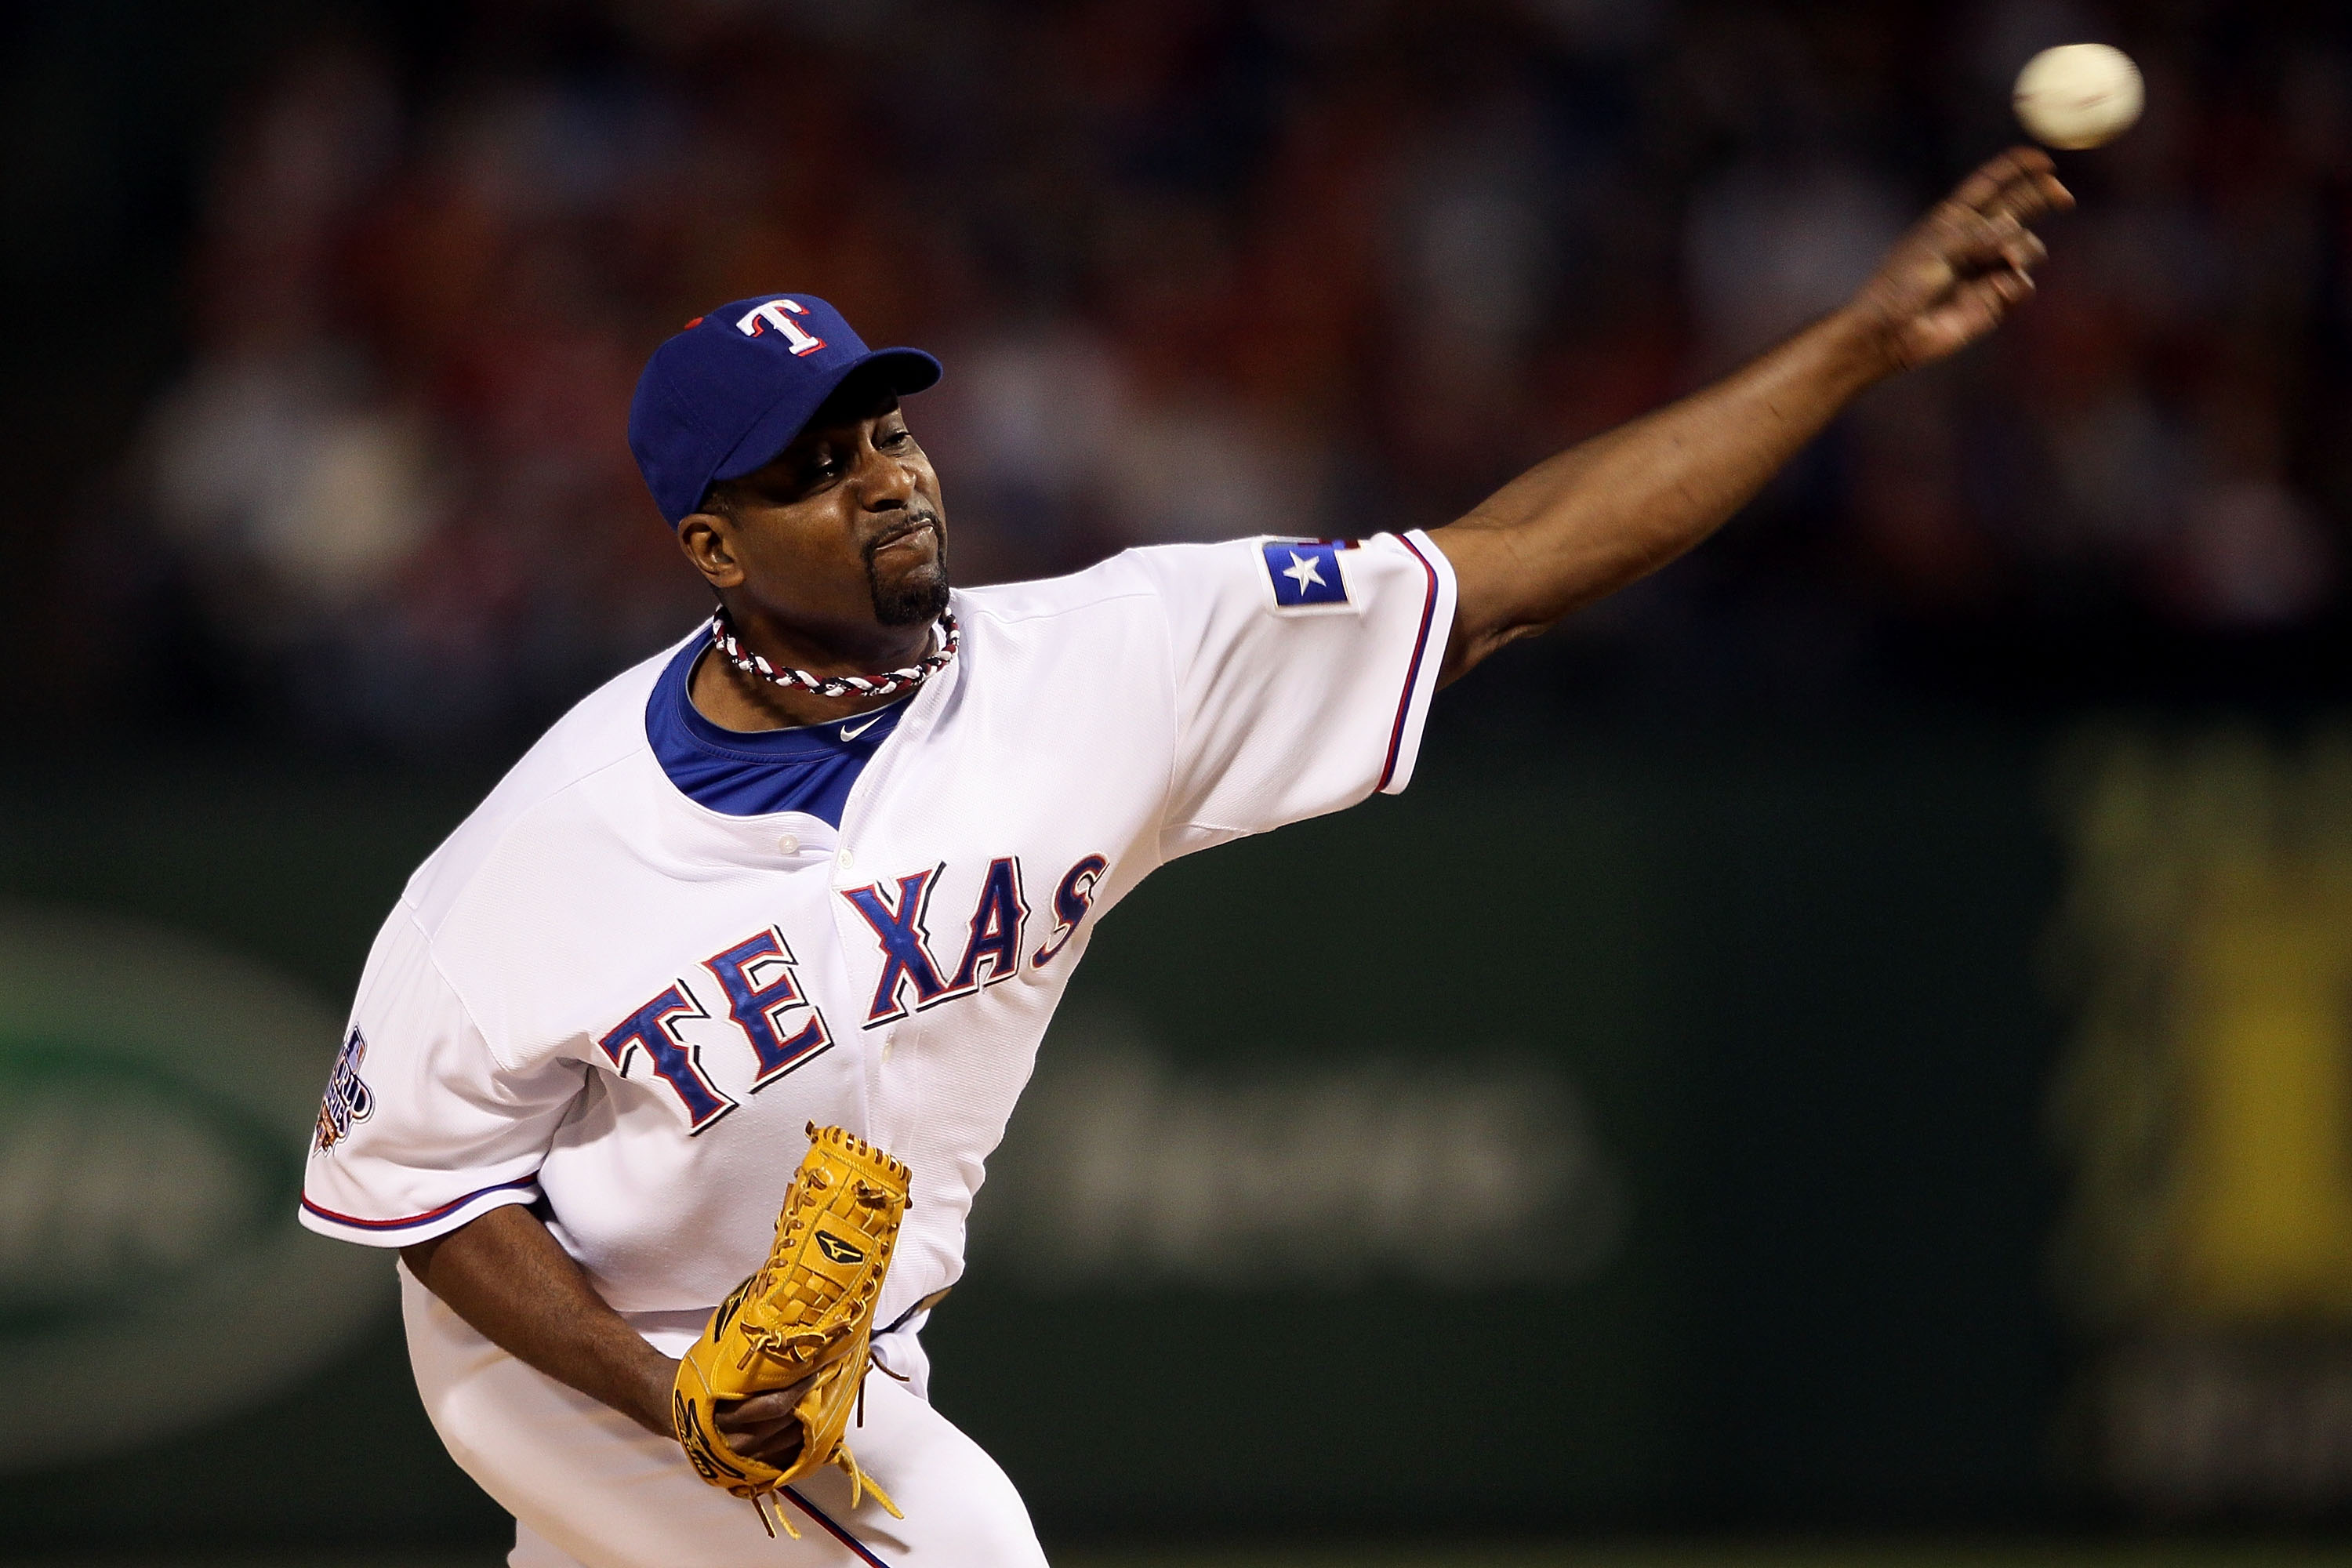 ARLINGTON, TX - OCTOBER 31:  Darren Oliver #28 of the Texas Rangers pitches against the San Francisco Giants in Game Four of the 2010 MLB World Series at Rangers Ballpark in Arlington on October 31, 2010 in Arlington, Texas.  (Photo by Elsa/Getty Images)